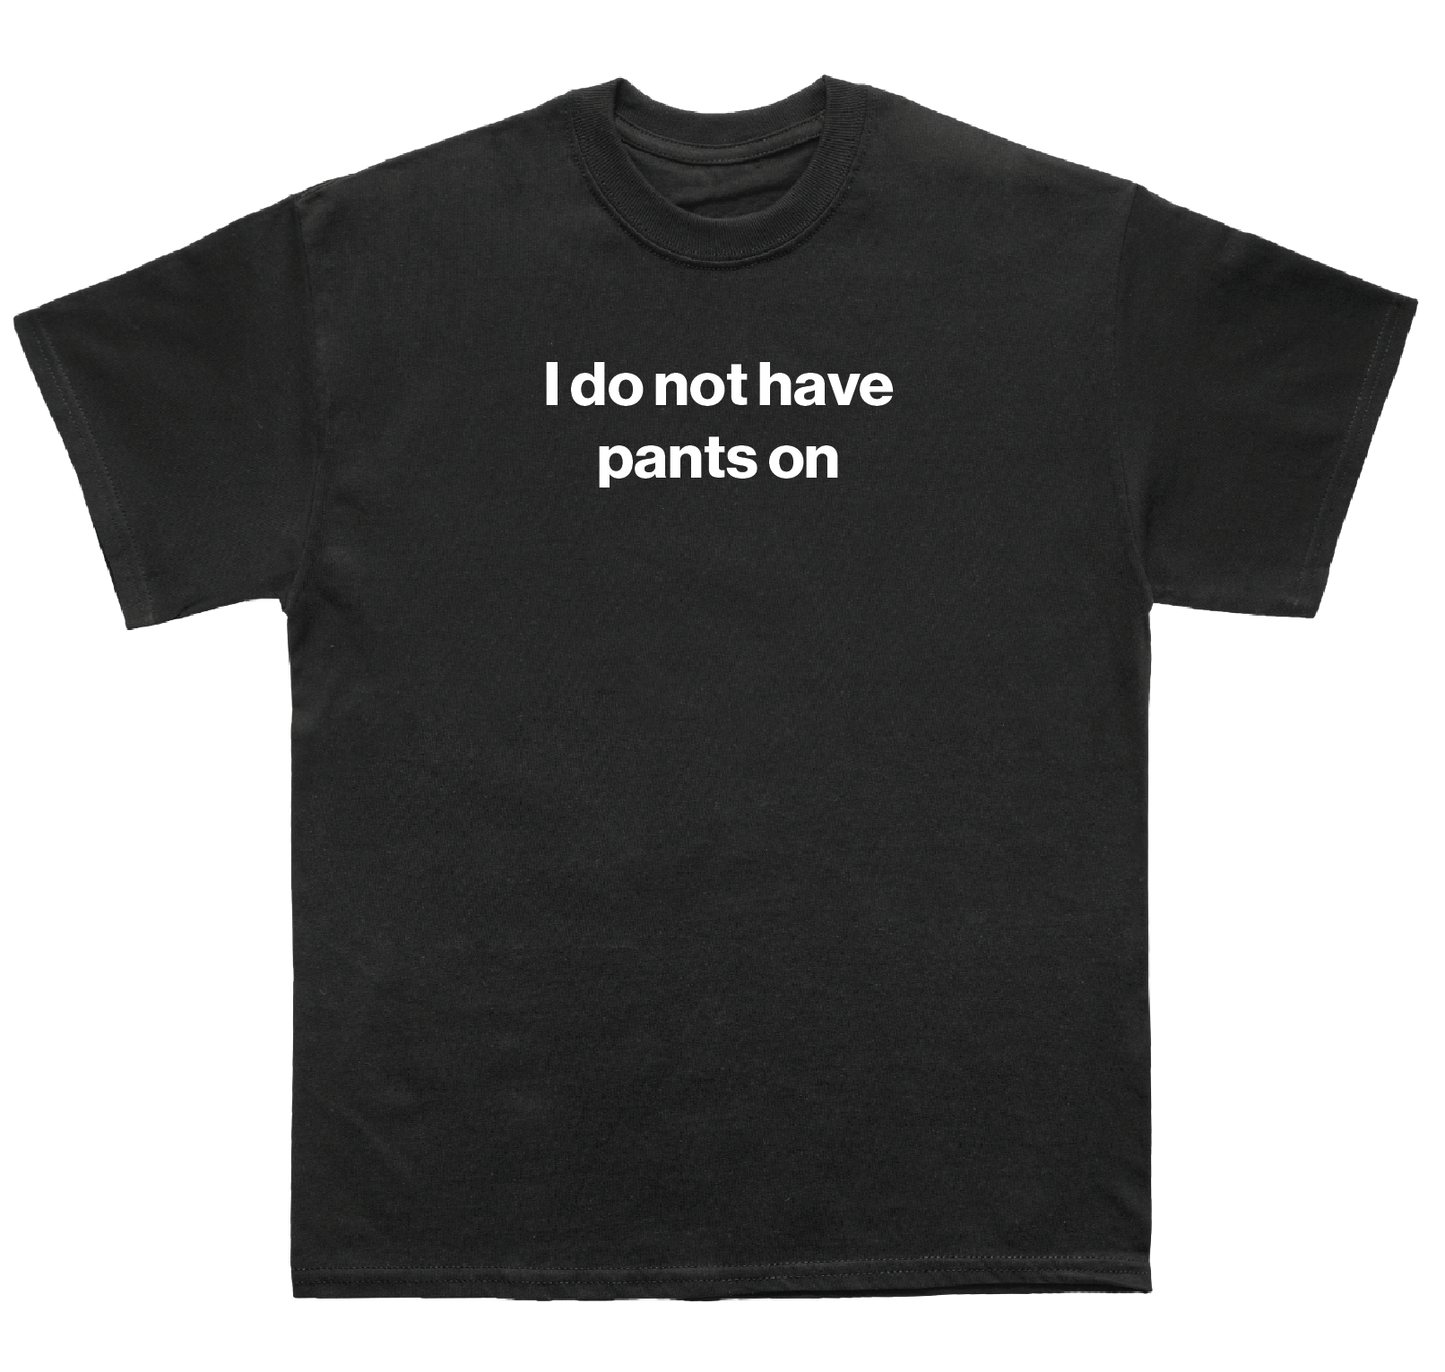 I do not have pants on shirt